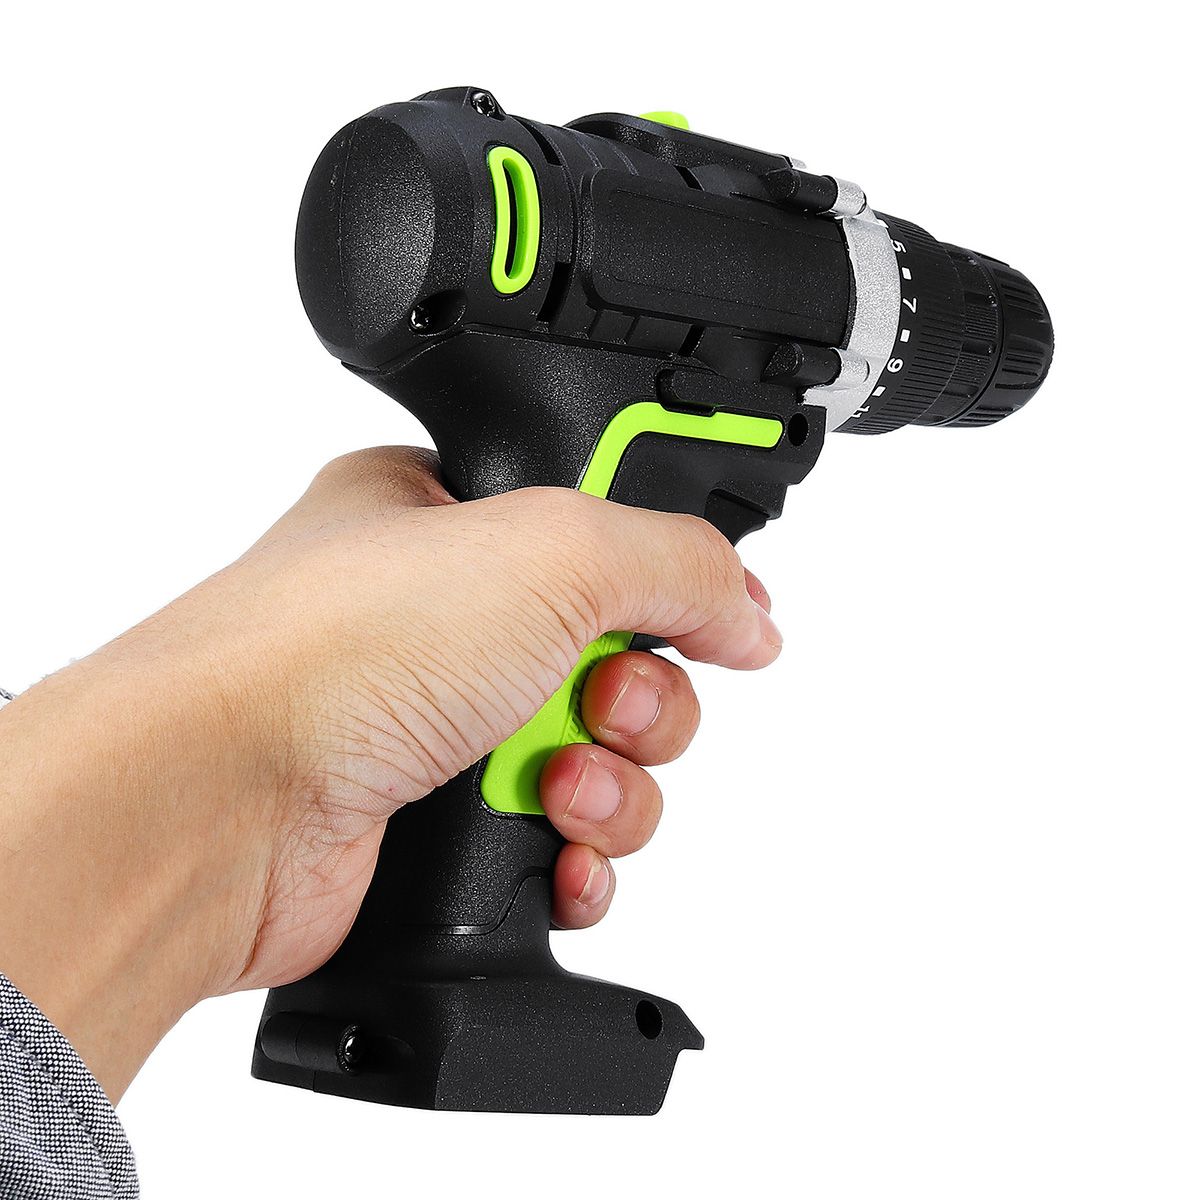 48V-12-Inch-Electric-Brushless-Impact-Wrench-Cordless-Rechargeable-Torque-Drill-Tool-1738167